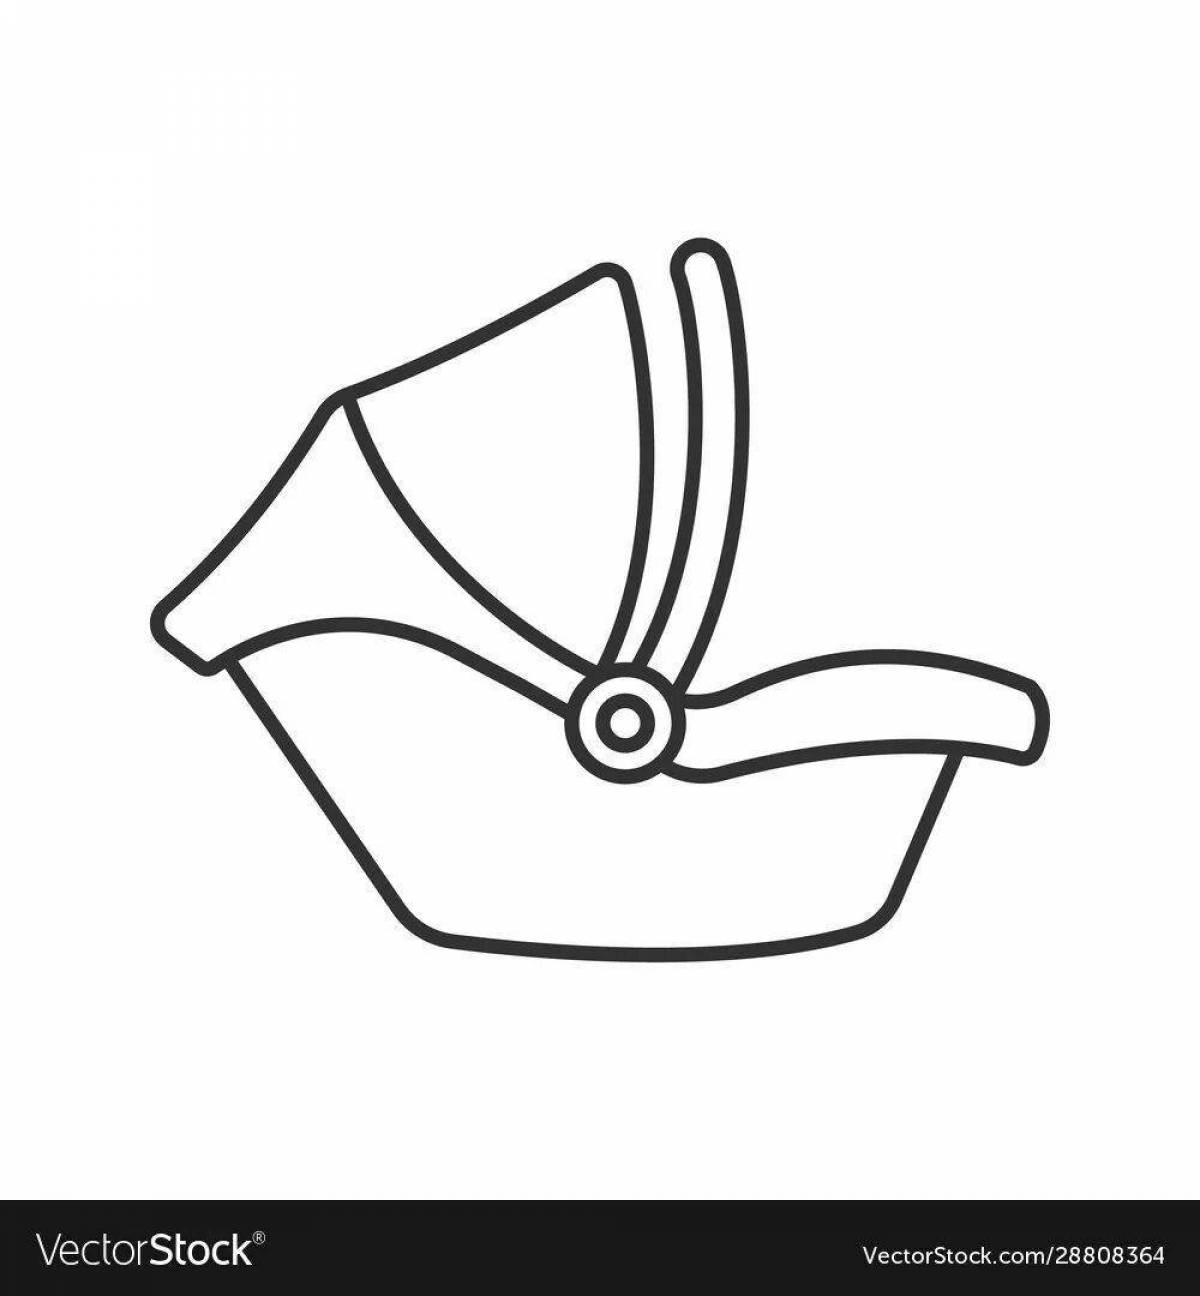 Gorgeous car seat coloring page